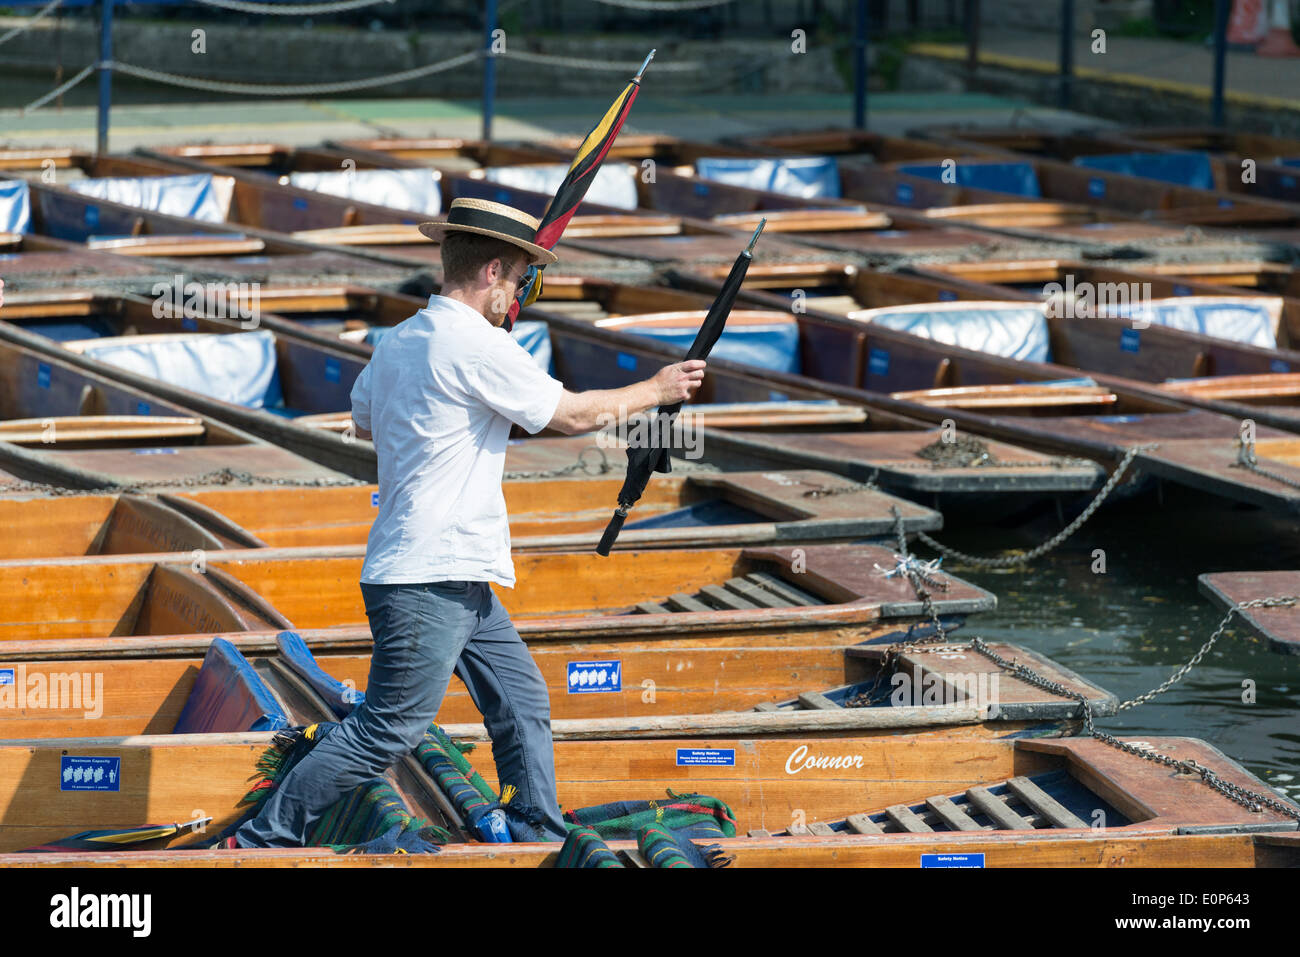 Cambridge UK , 18th May 2014. Staff at Scudamore's Boatyard prepare the punts for a busy Sunday punting on the River Cam, Cambridge UK as another warm sunny day is forecast.  The temperature is expected to reach 24 degrees centigrade.  Many tourists will take chauffeured punt trips along the river enjoying the sights of the historic University buildings.  Credit Julian Eales/Alamy Live News Stock Photo